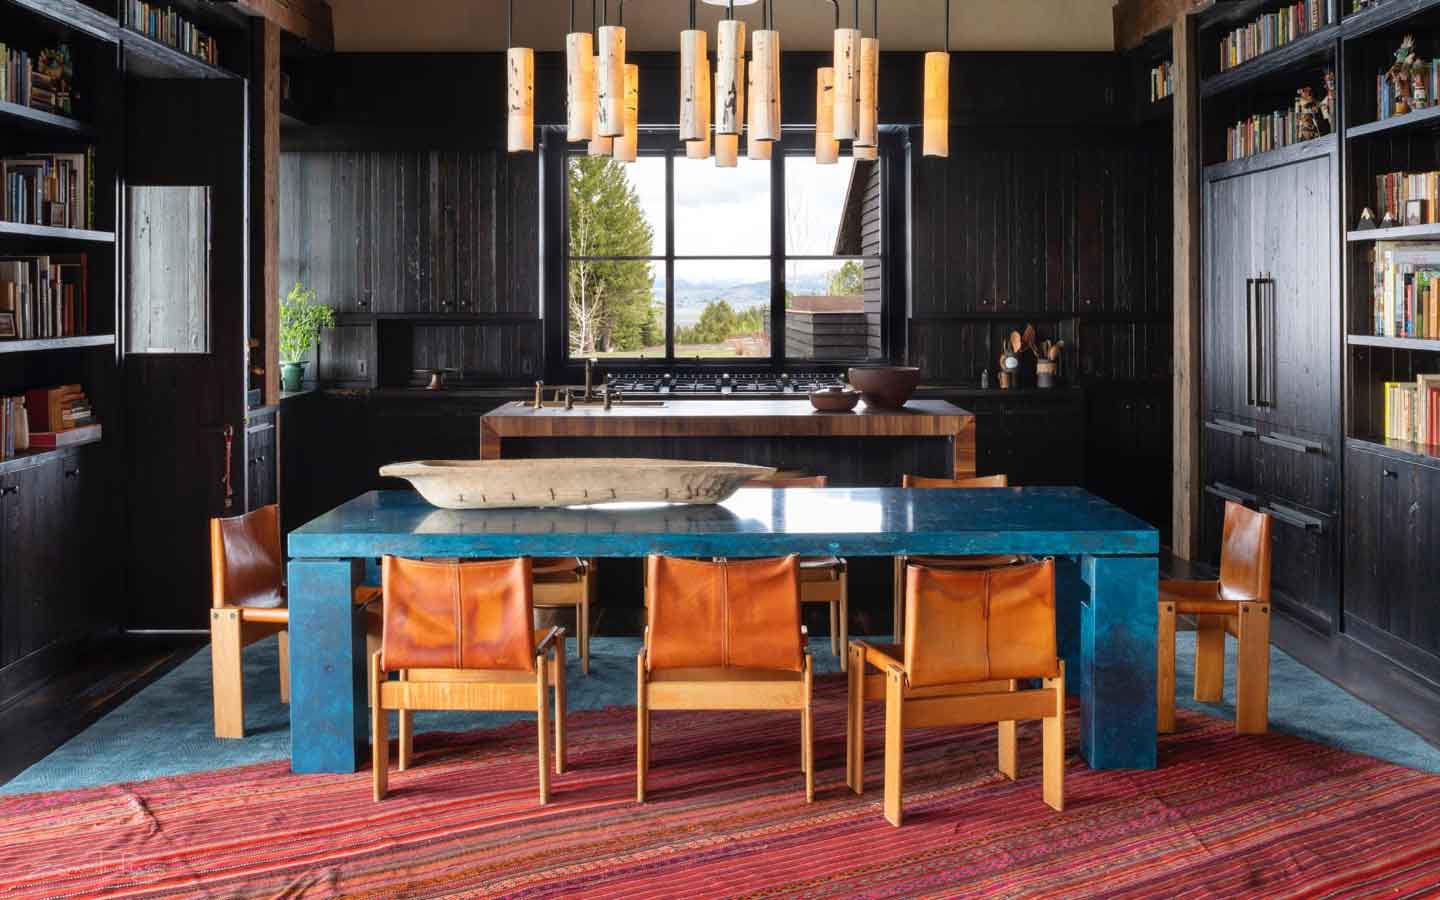 Kilim Rugs Decorating Dining Room Rustic Mountain House